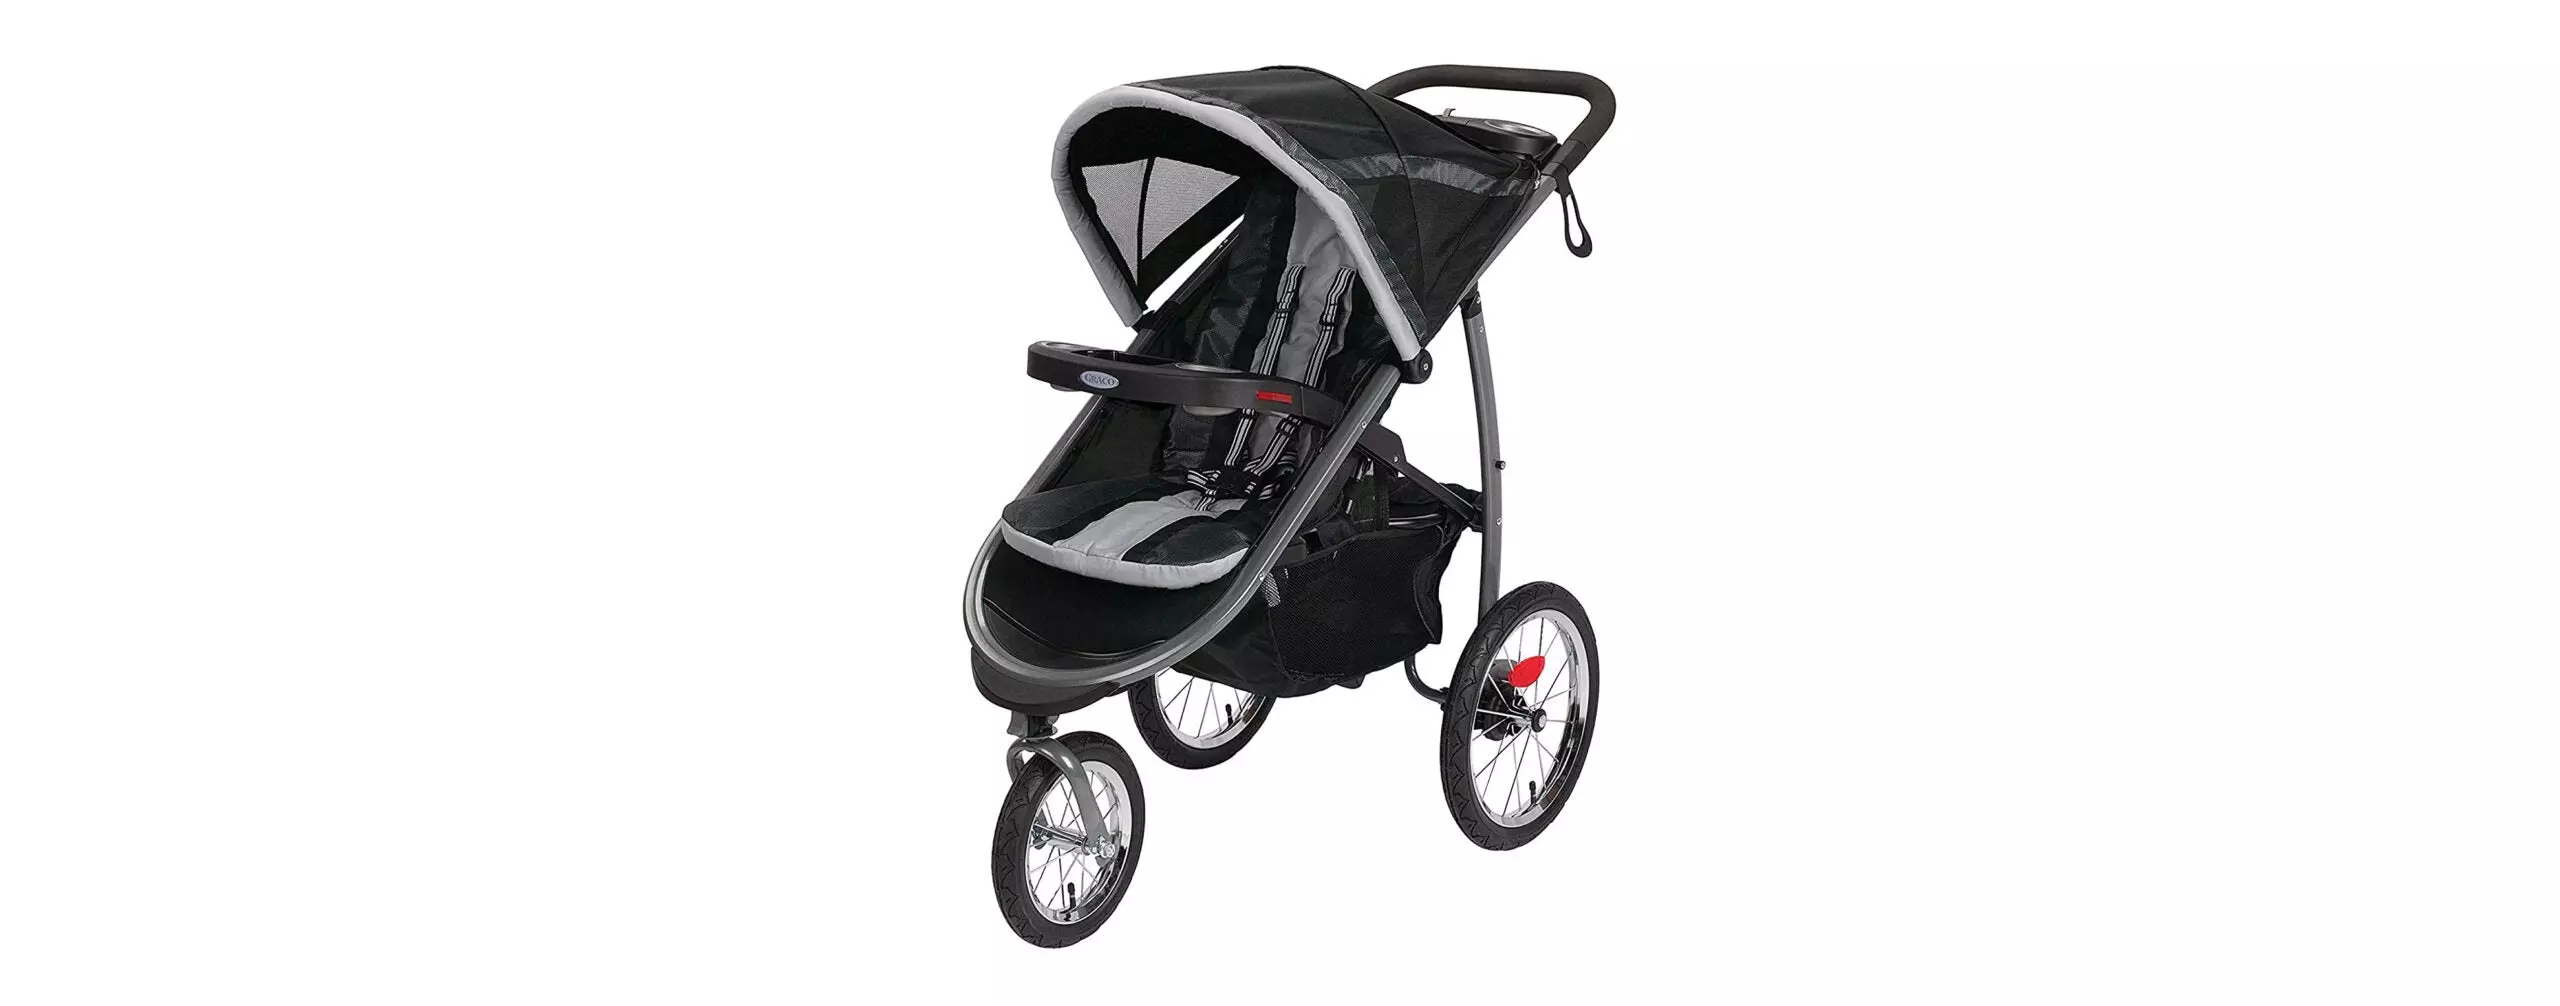 The Best Jogger Strollers (Review and Buying Guide) in 2022